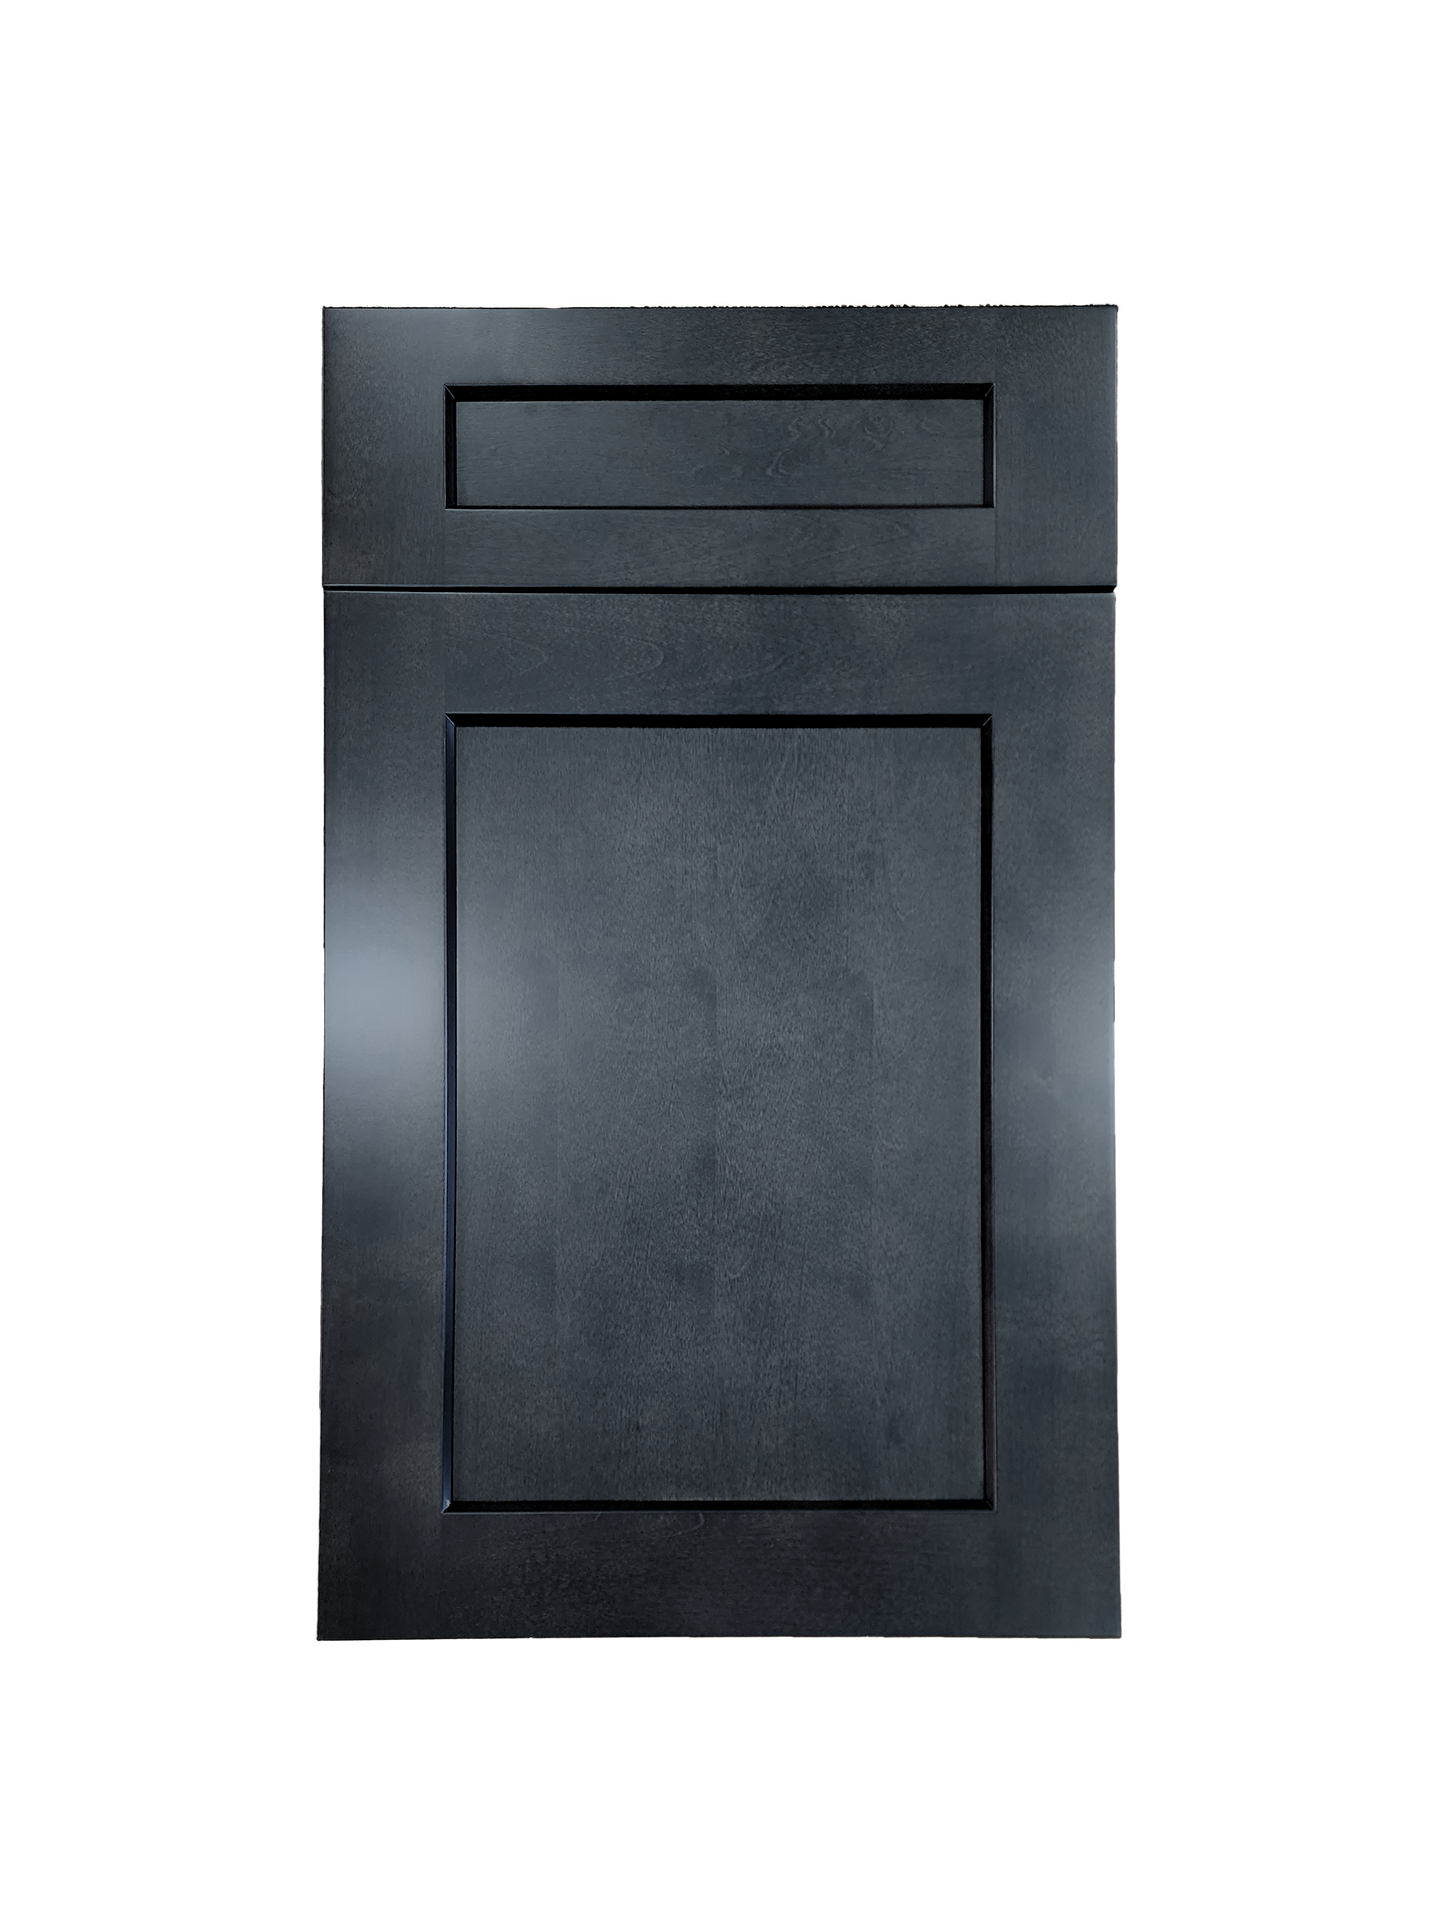 Stormy Grey Easy Reach Cabinet 33 inches wide 24 inches deep 34.5 inches tall with Stormy Grey box and Stormy Grey doors